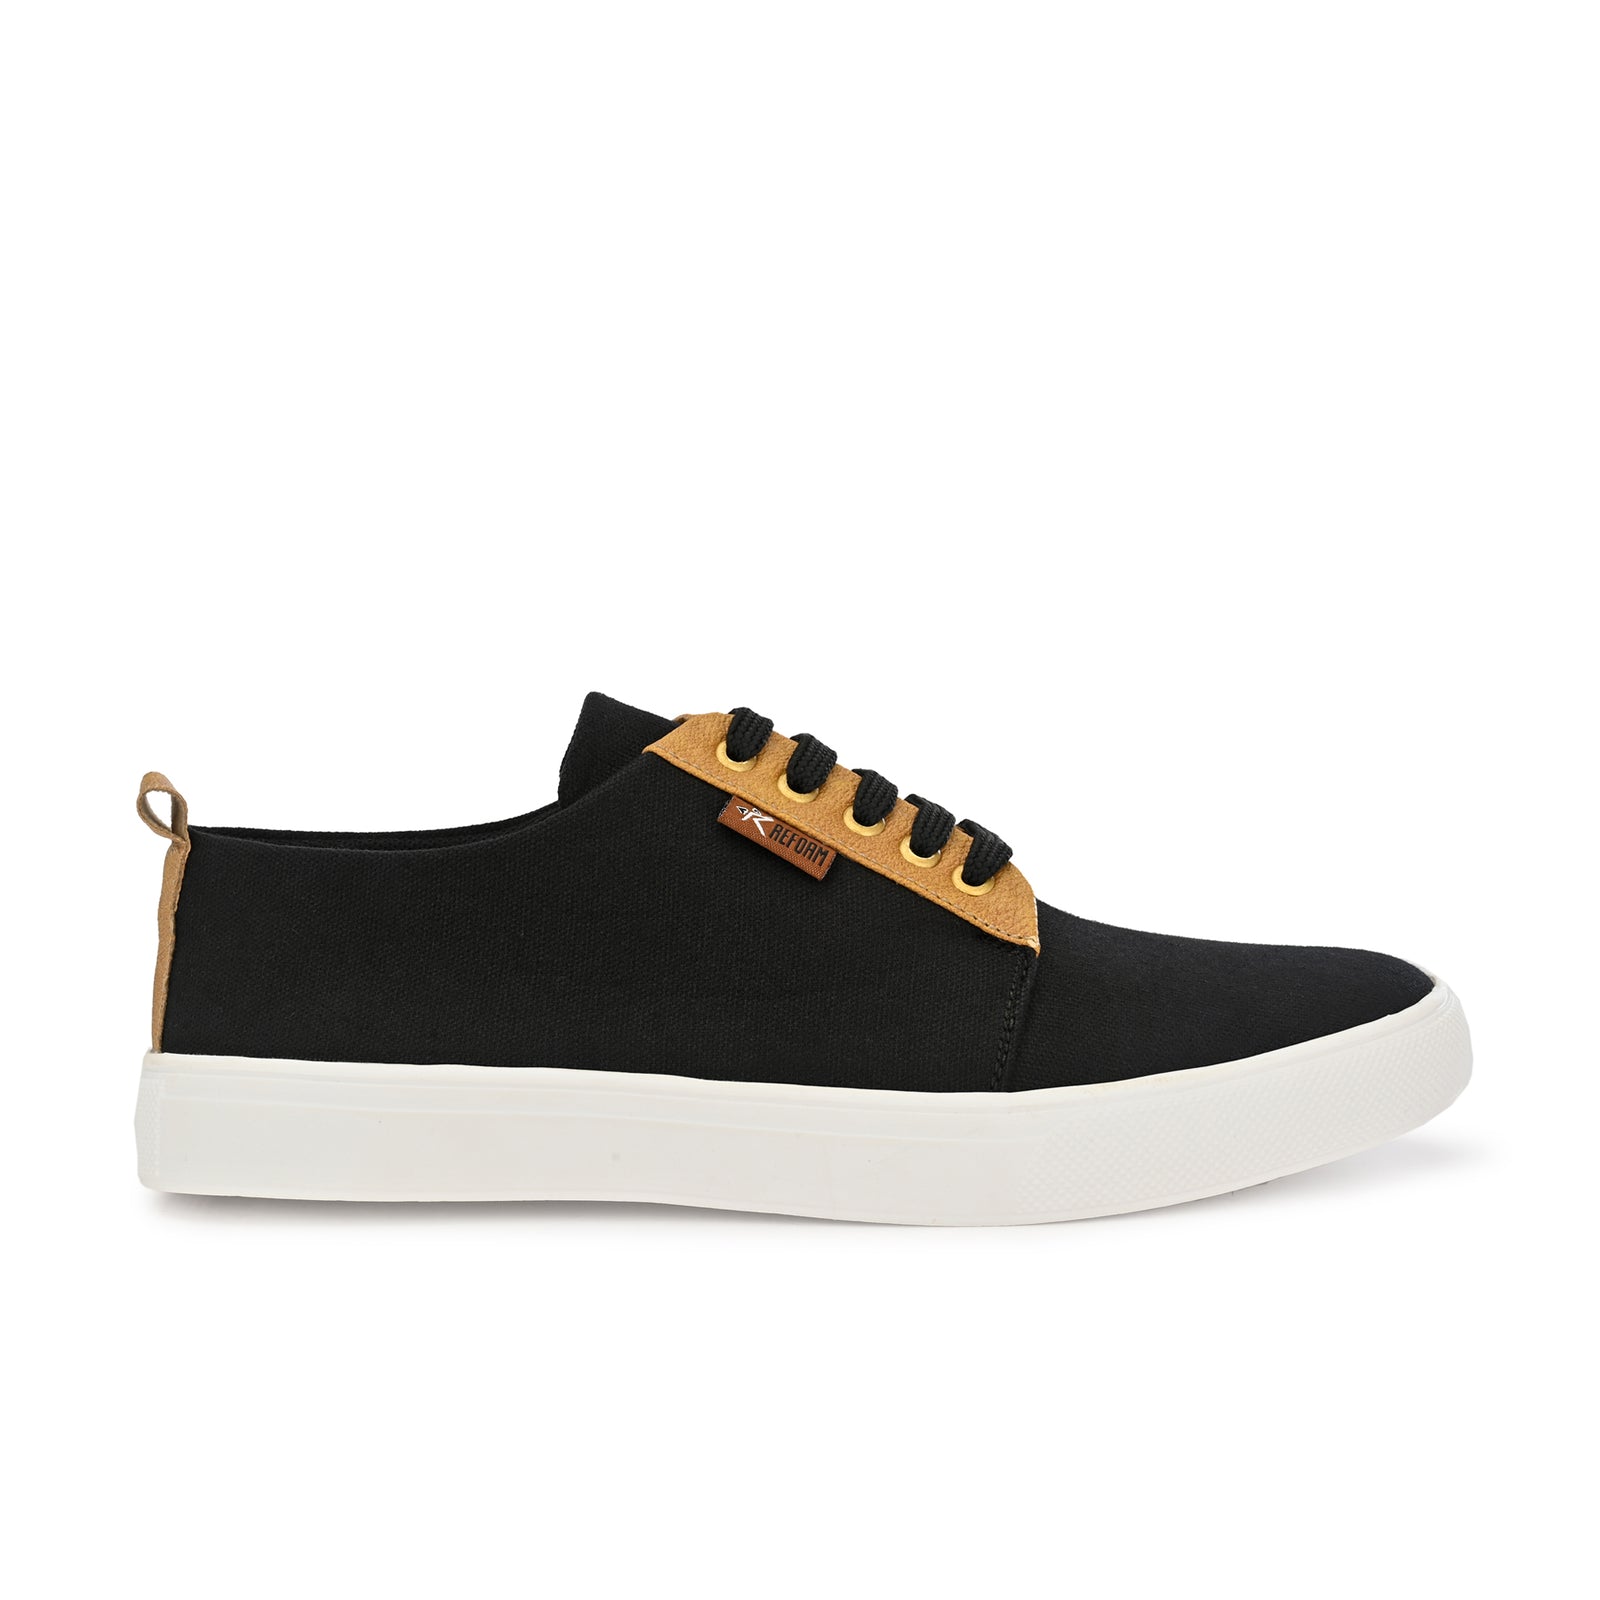 Black Solid Fabric Lace Up Lifestyle Casual Shoes For Men